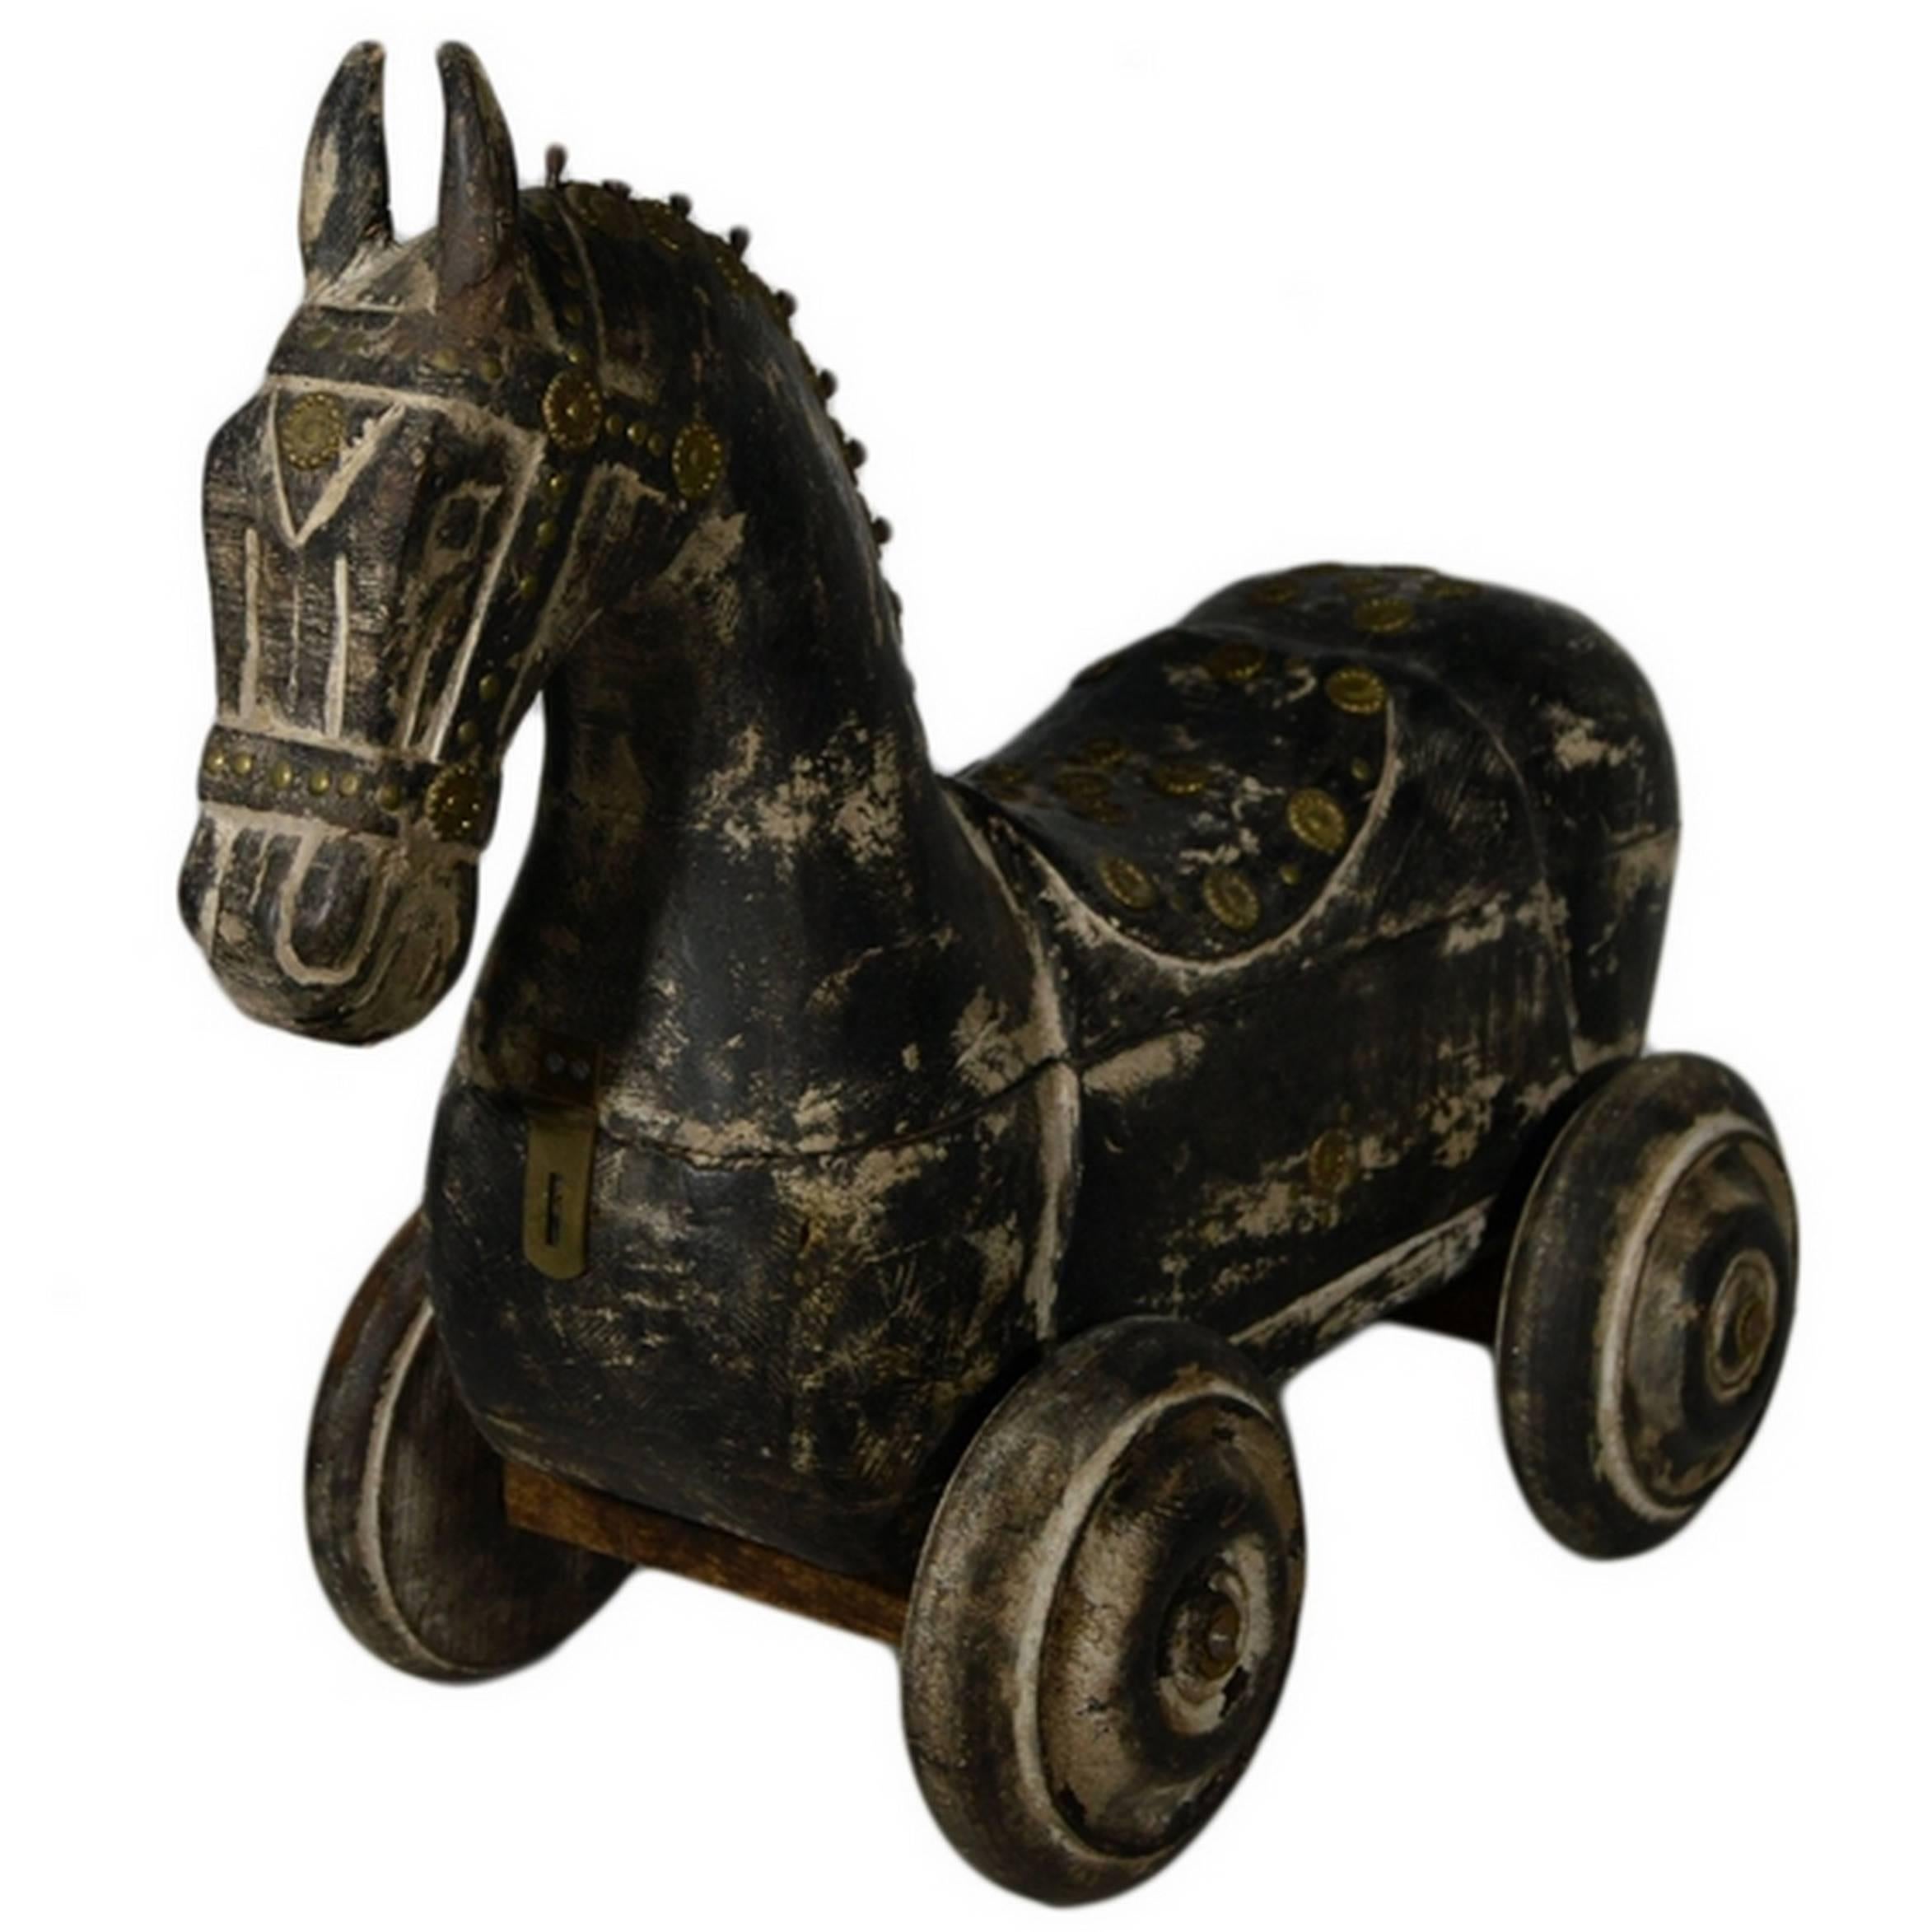 Vintage Indian Hand Carved Wooden Horse with Wheels and Iron Features